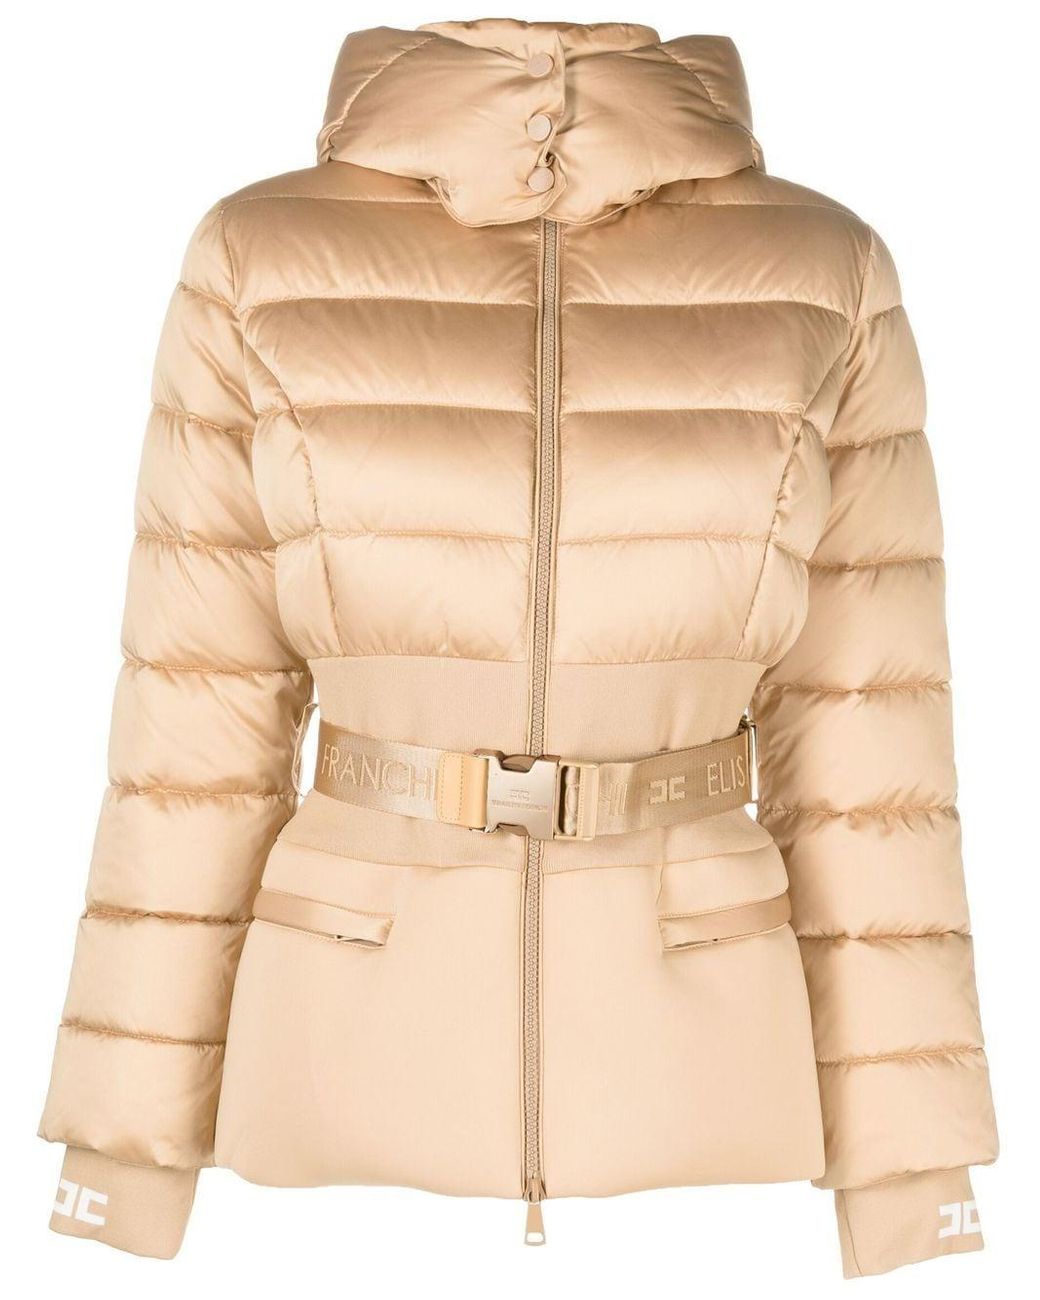 Elisabetta Franchi Hooded Puffer Jacket in Natural | Lyst